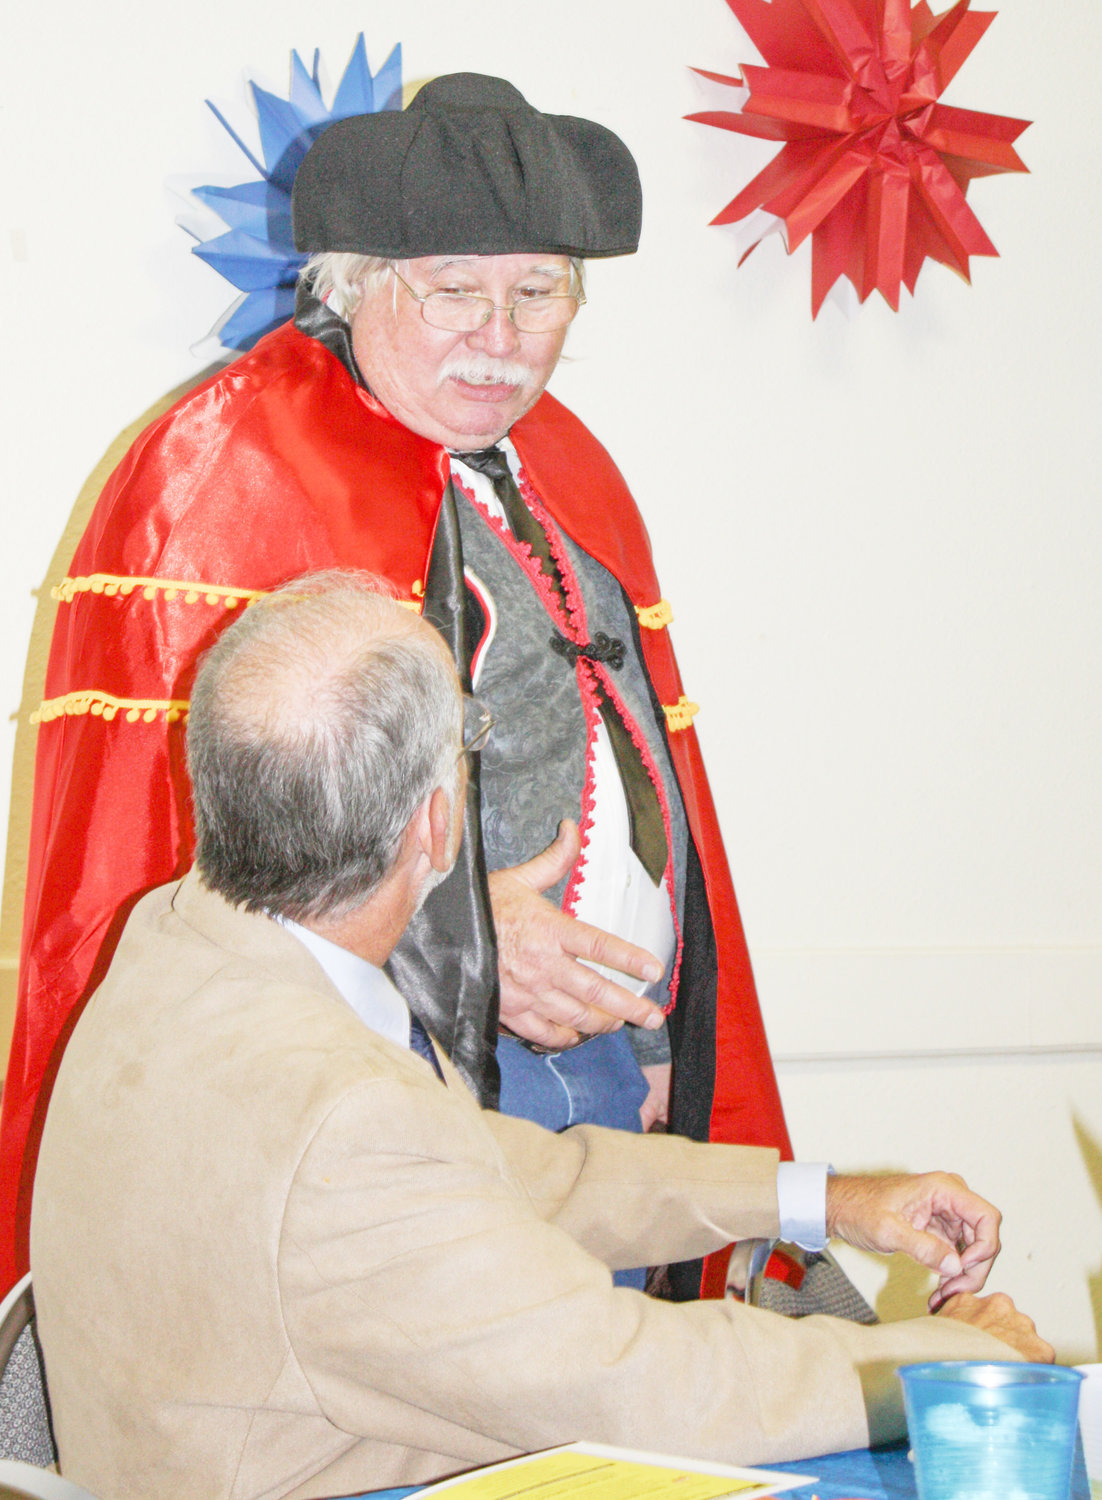 Master of ceremonies Sam Scroggins was on the prowl between stints on the microphone as he donned a matador’s jacket, cape and hat to set the mood for the Quitman Pilot Club’s Fiesta Extravaganza Feliz Navidad Nov. 12 at the Carroll Green Civic Center.